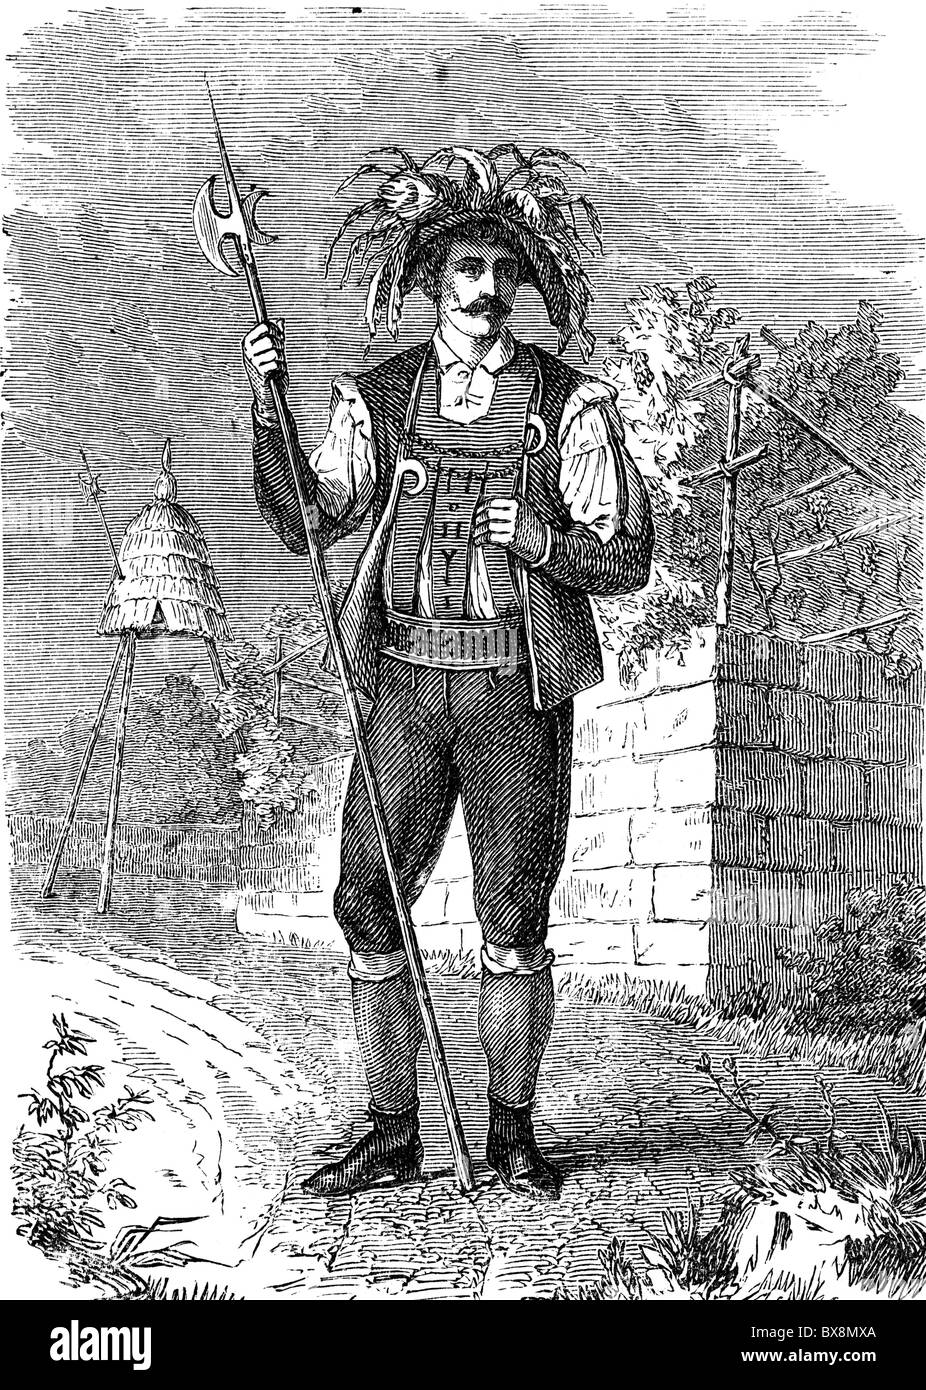 people, professions, saltner (keeper of the vineyard), near Meran, South Tyrol, wood engraving, 19th century, costume, guard, weapon, partisan, Italy, Austria-Hungary, Austria, Cisleithania, Austro-Hungarian Empire, Austro - Hungarian, historic, historical, Alps, Additional-Rights-Clearences-Not Available Stock Photo